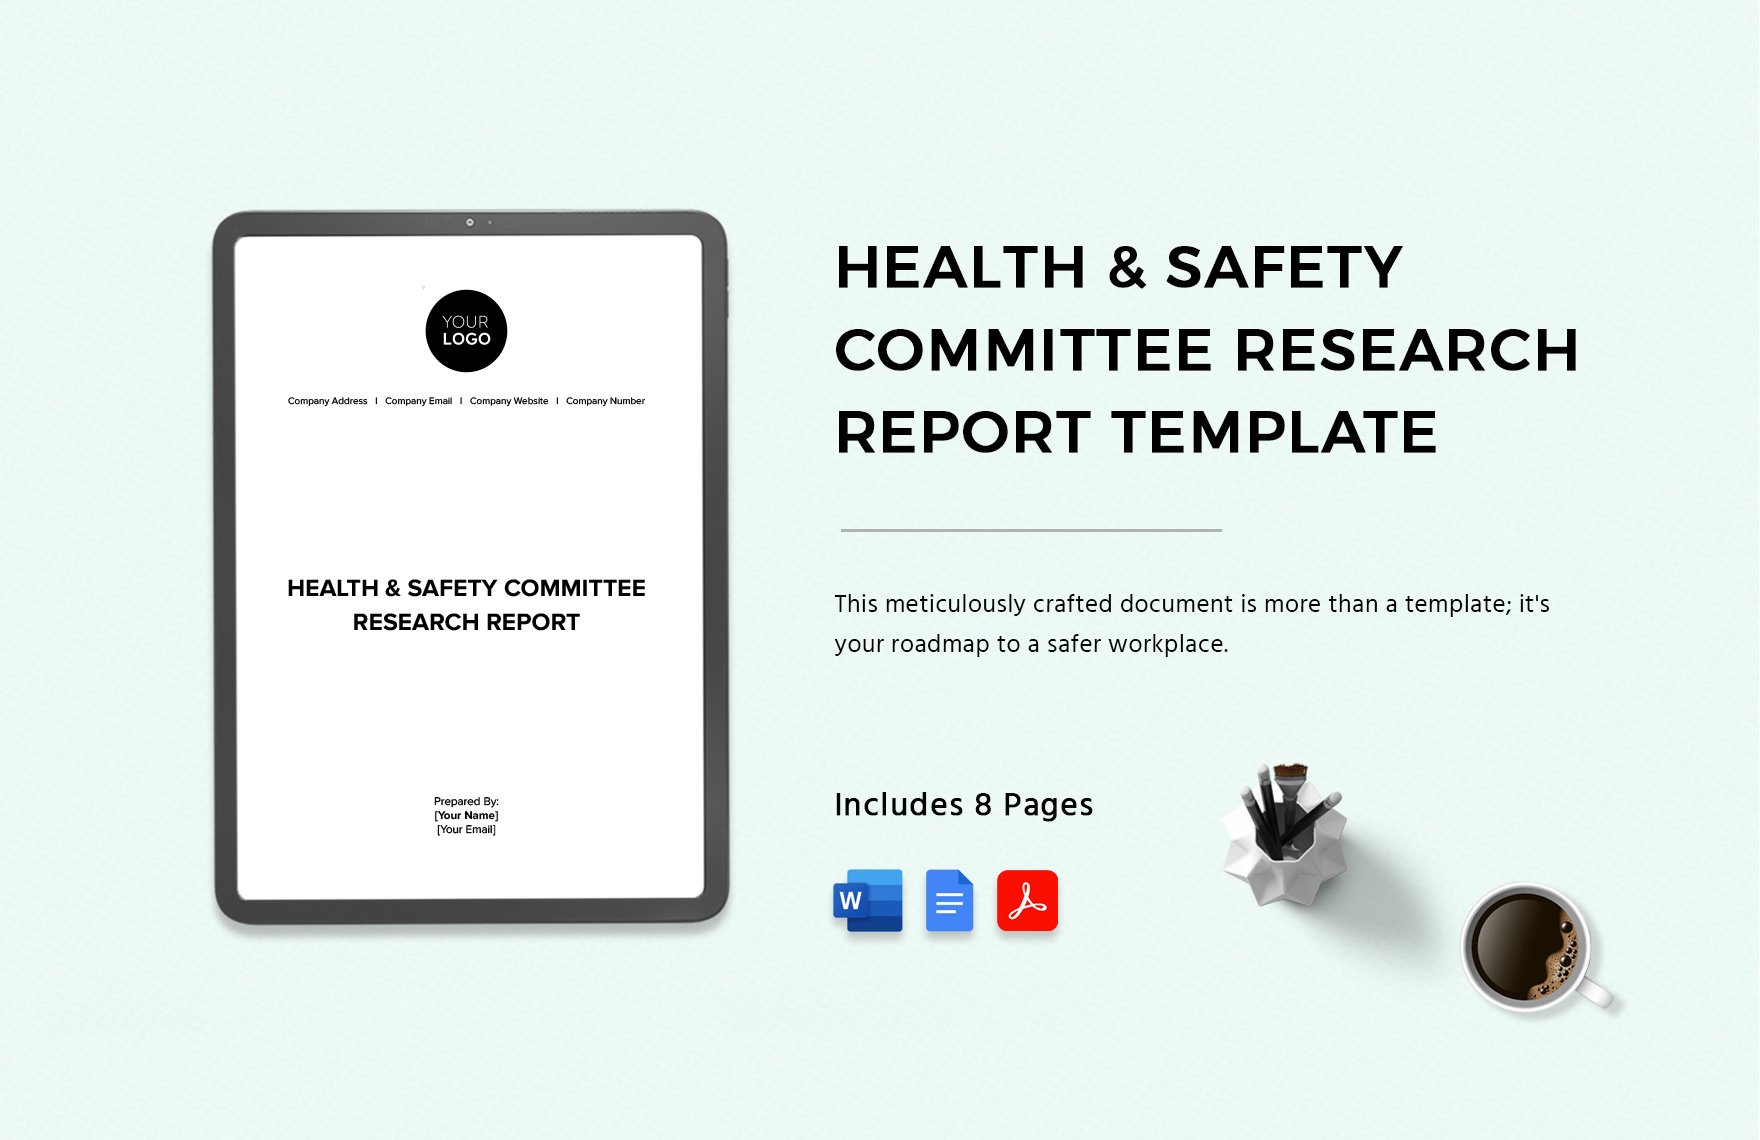 Health & Safety Committee Research Report Template